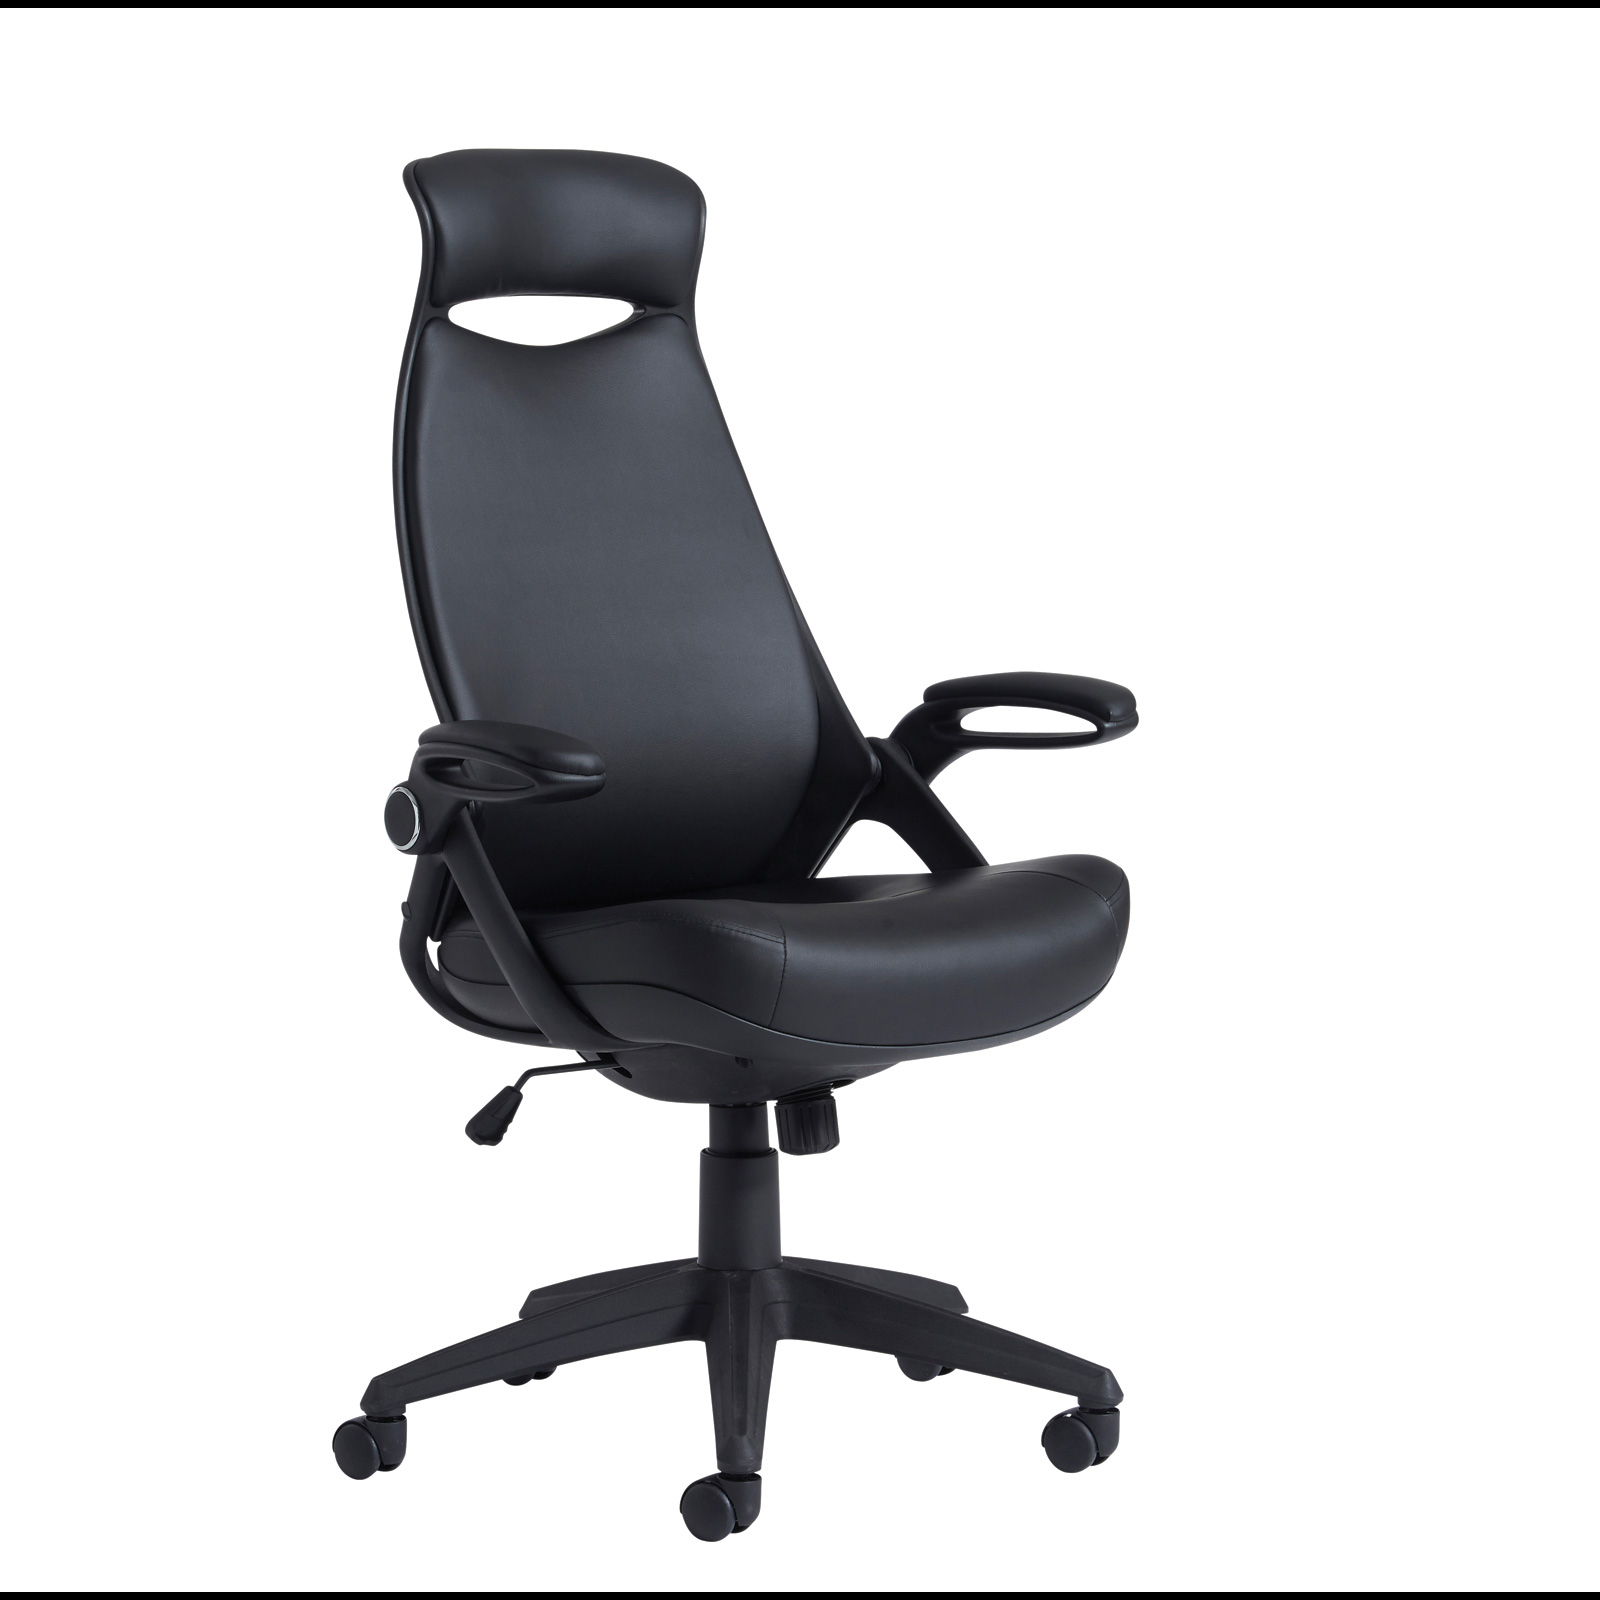 Tuscan high back managers chair with head support - black faux leather